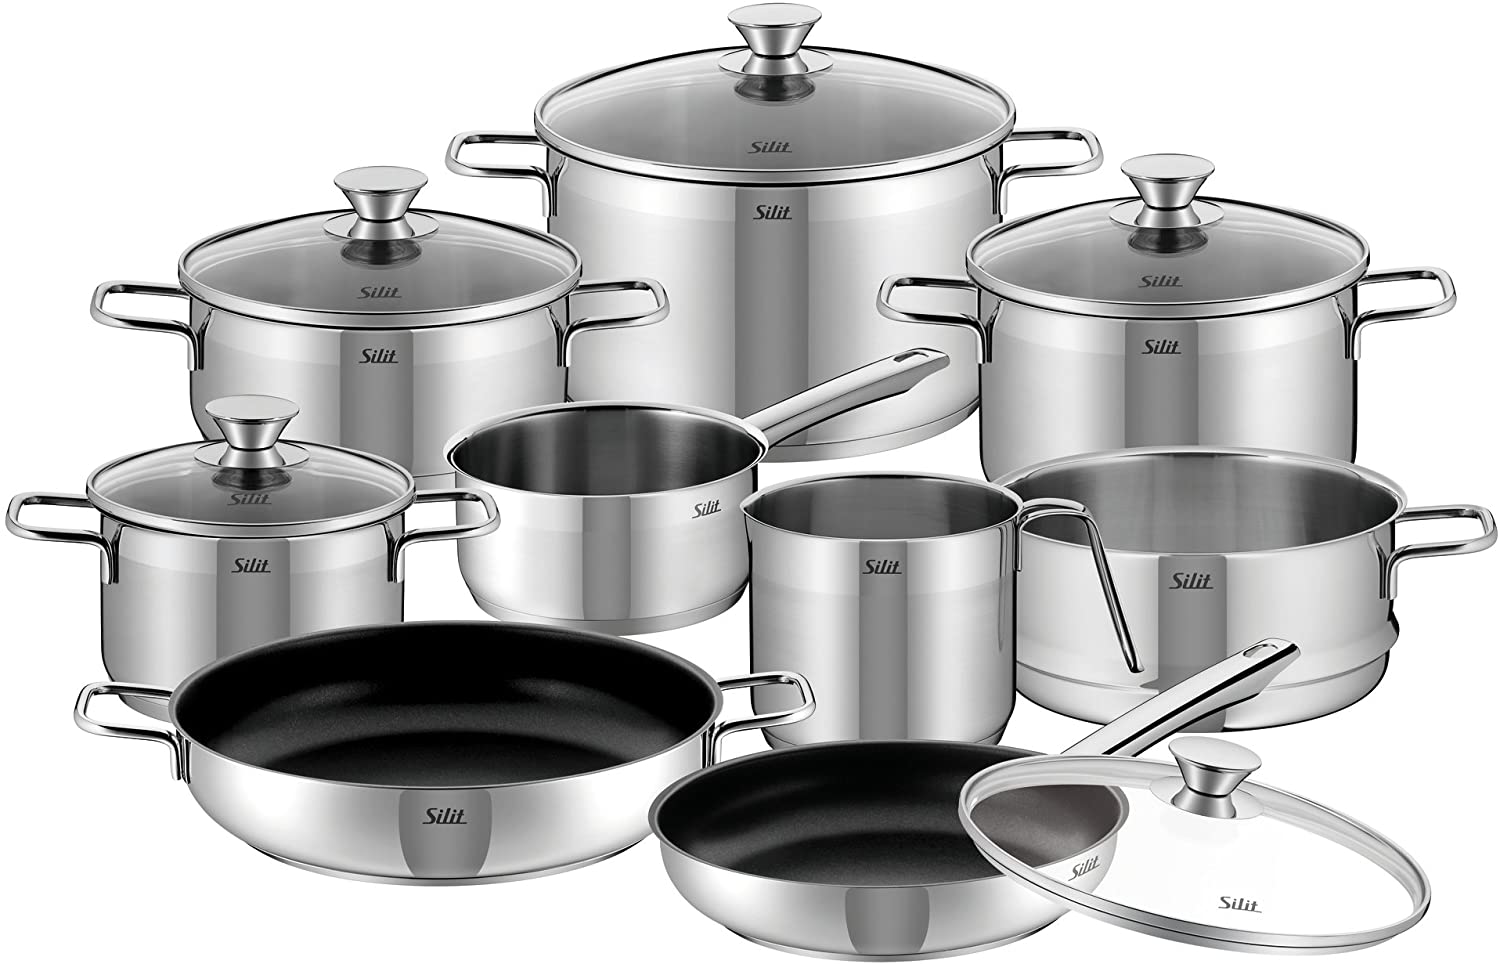 Silit Pisa 10-Piece Saucepan Set, with Glass Lid, Cooking Pot, Saucepan, Milk Pan, Steamer Insert, Pan Coated, Polished Stainless Steel, Suitable for Induction Cookers, 40.5 x 35 x 26 cm